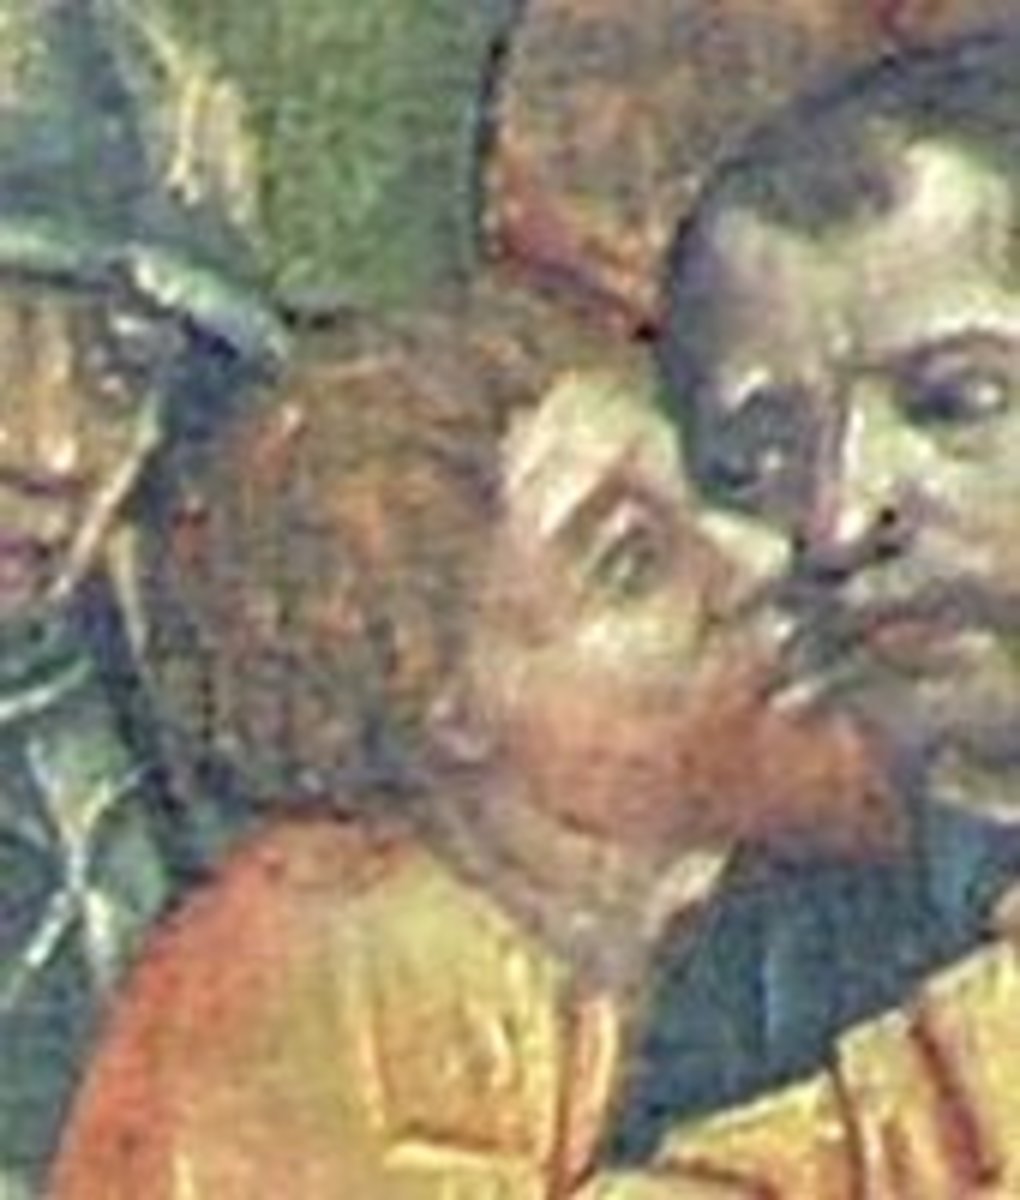 Most paintings show Judas as a redhead.